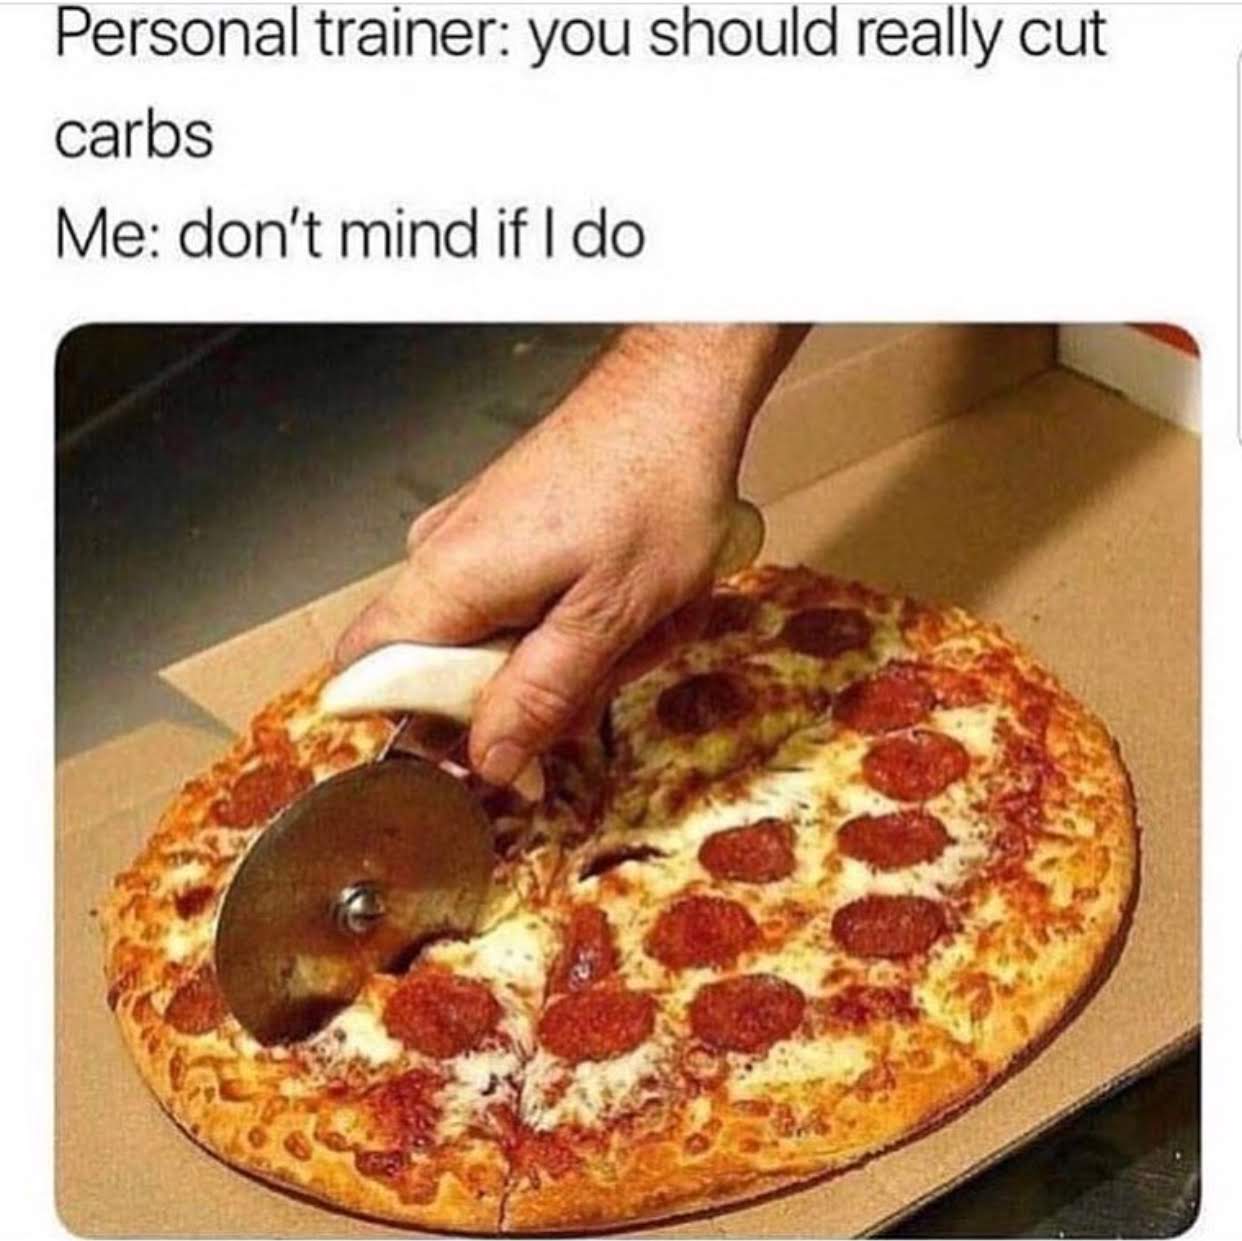 cut carbs meme - Personal trainer you should really cut carbs Me don't mind if I do